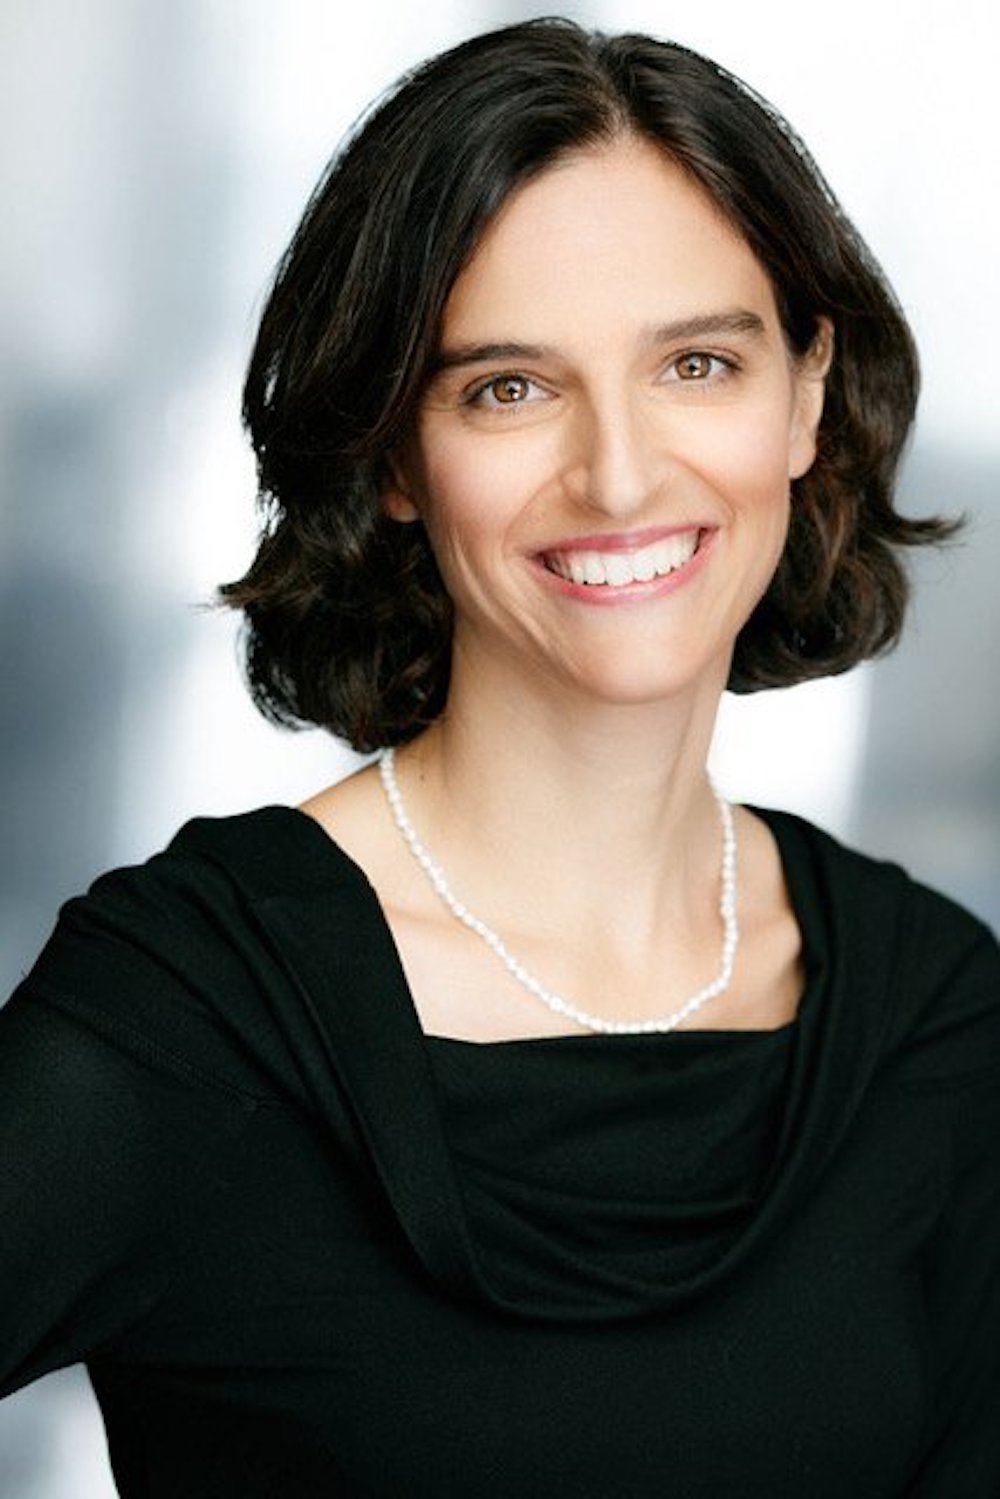 Chiara Daraio, a professor of mechanical engineering and applied physics at Caltech